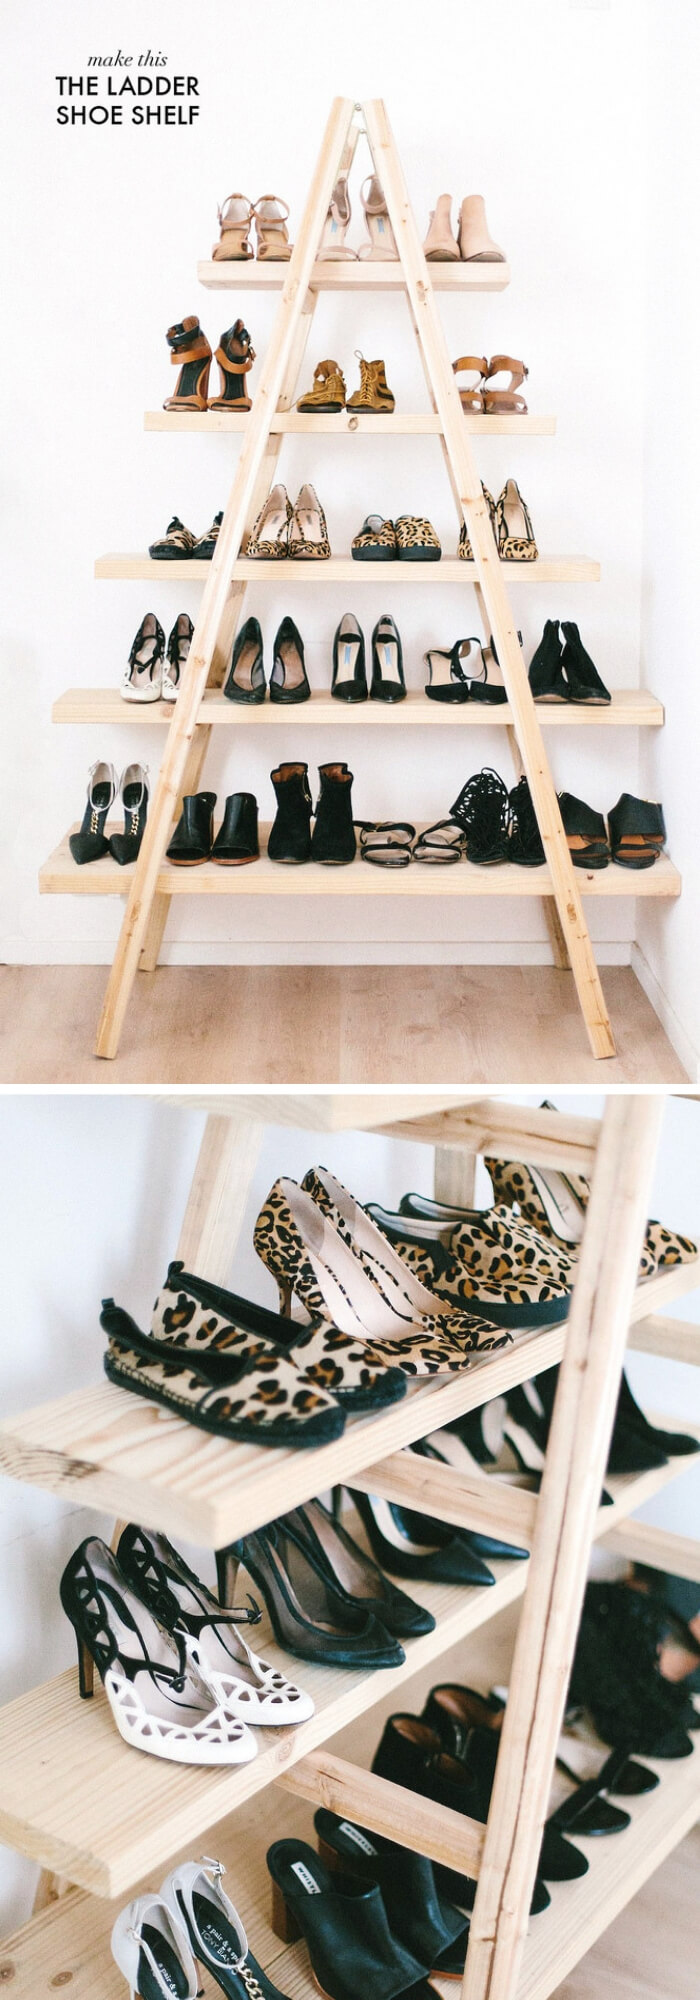 The Ladder Shoe Shelf (Pyramid Stairs) | Smart Shoe Storage Ideas & Designs For Any Zoom Size